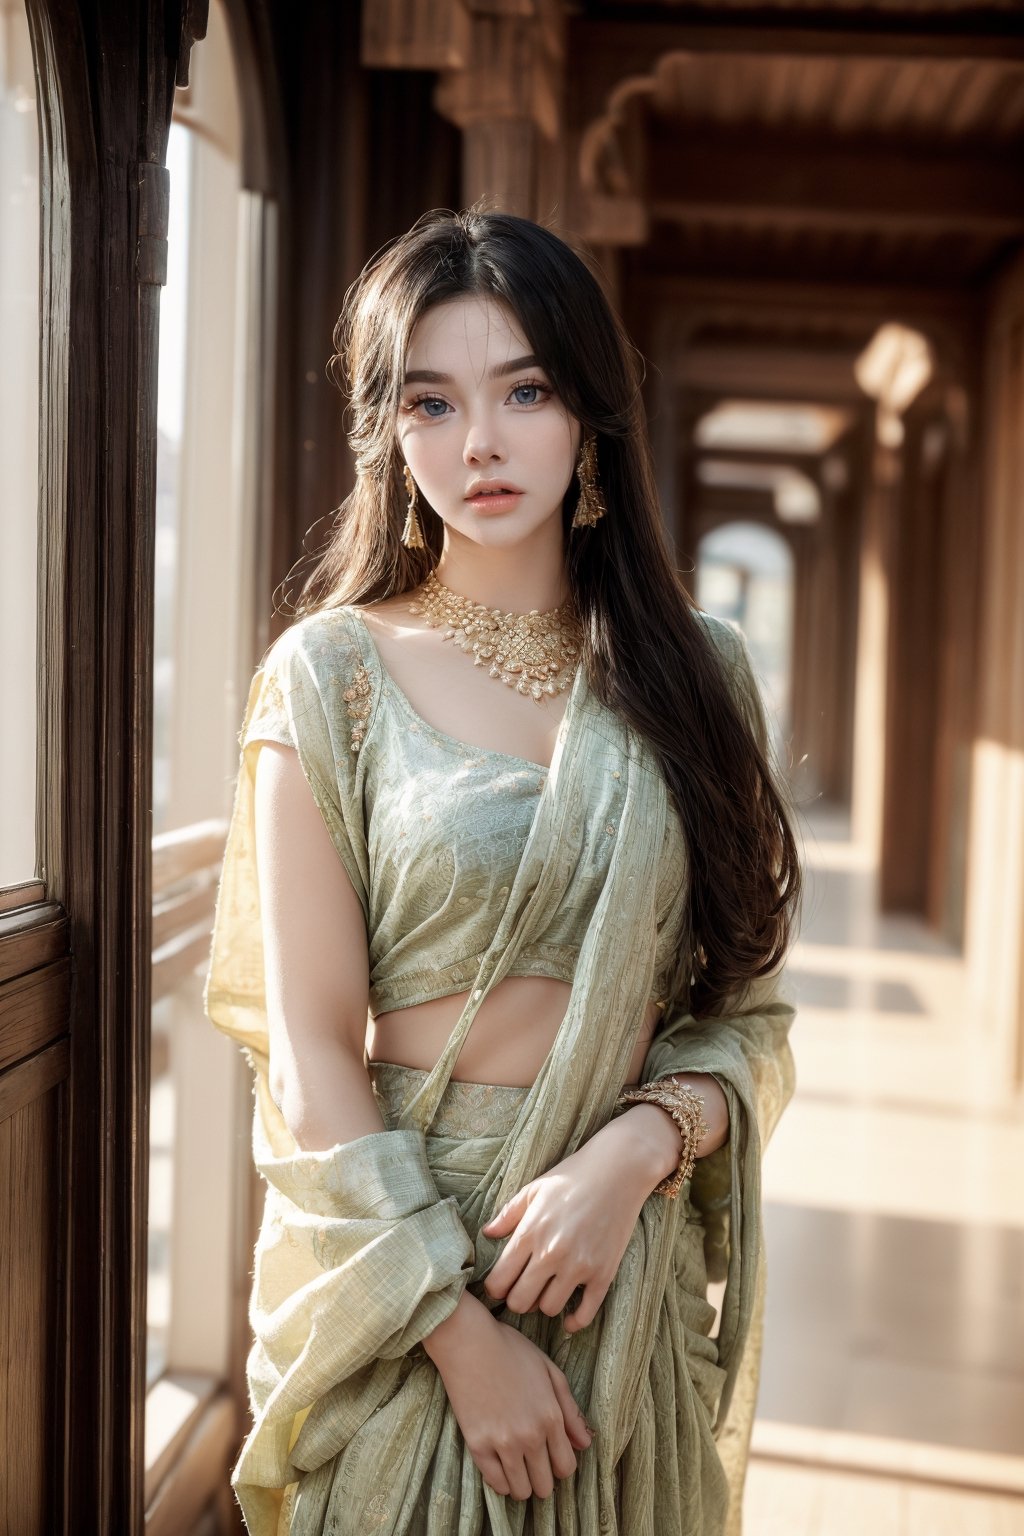 A woman wearing a traditional Indian sari and traditional jewelry looks at the camera and stands in the corridor. The soft sunlight illuminates the image, which highlights the beauty of the combination of traditional clothing and flowers.,DararatBoa,Detailedface